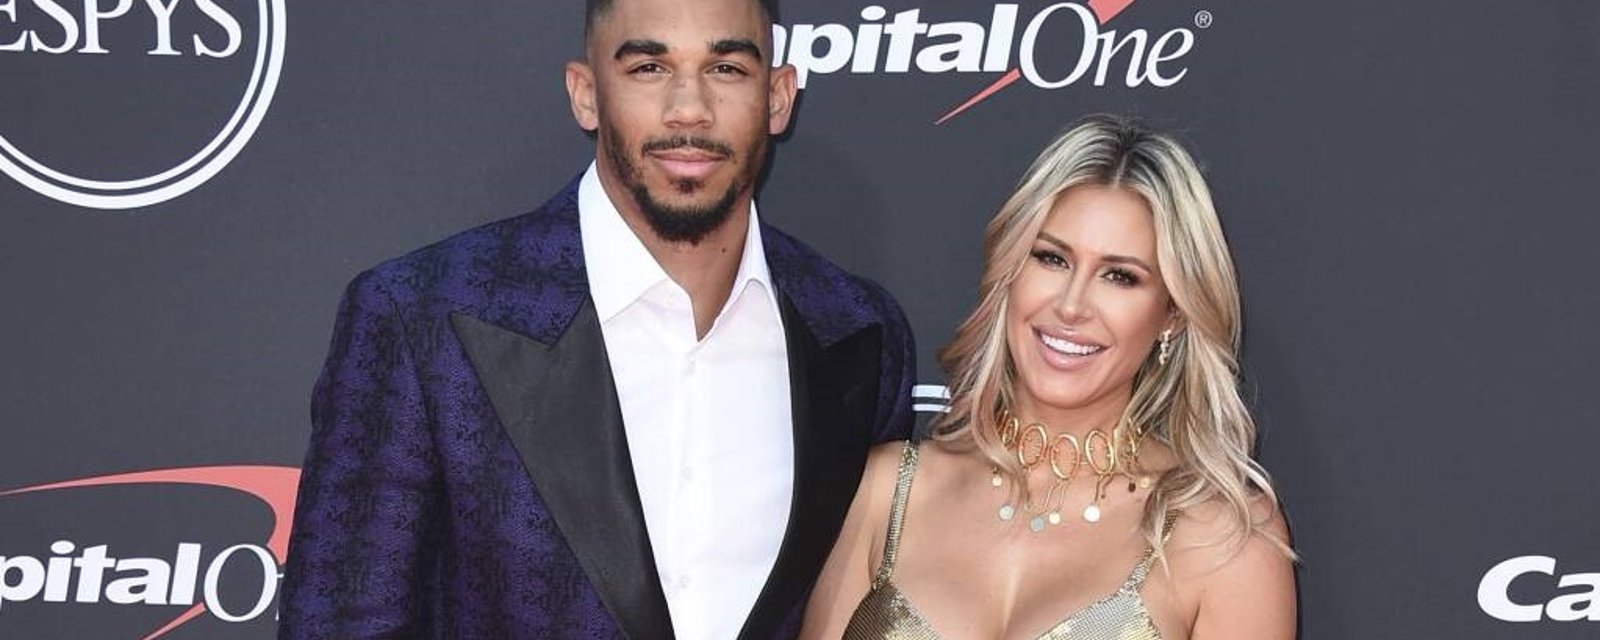 Evander Kane's wife makes terrible accusations against her husband, the Oilers and the NHL.